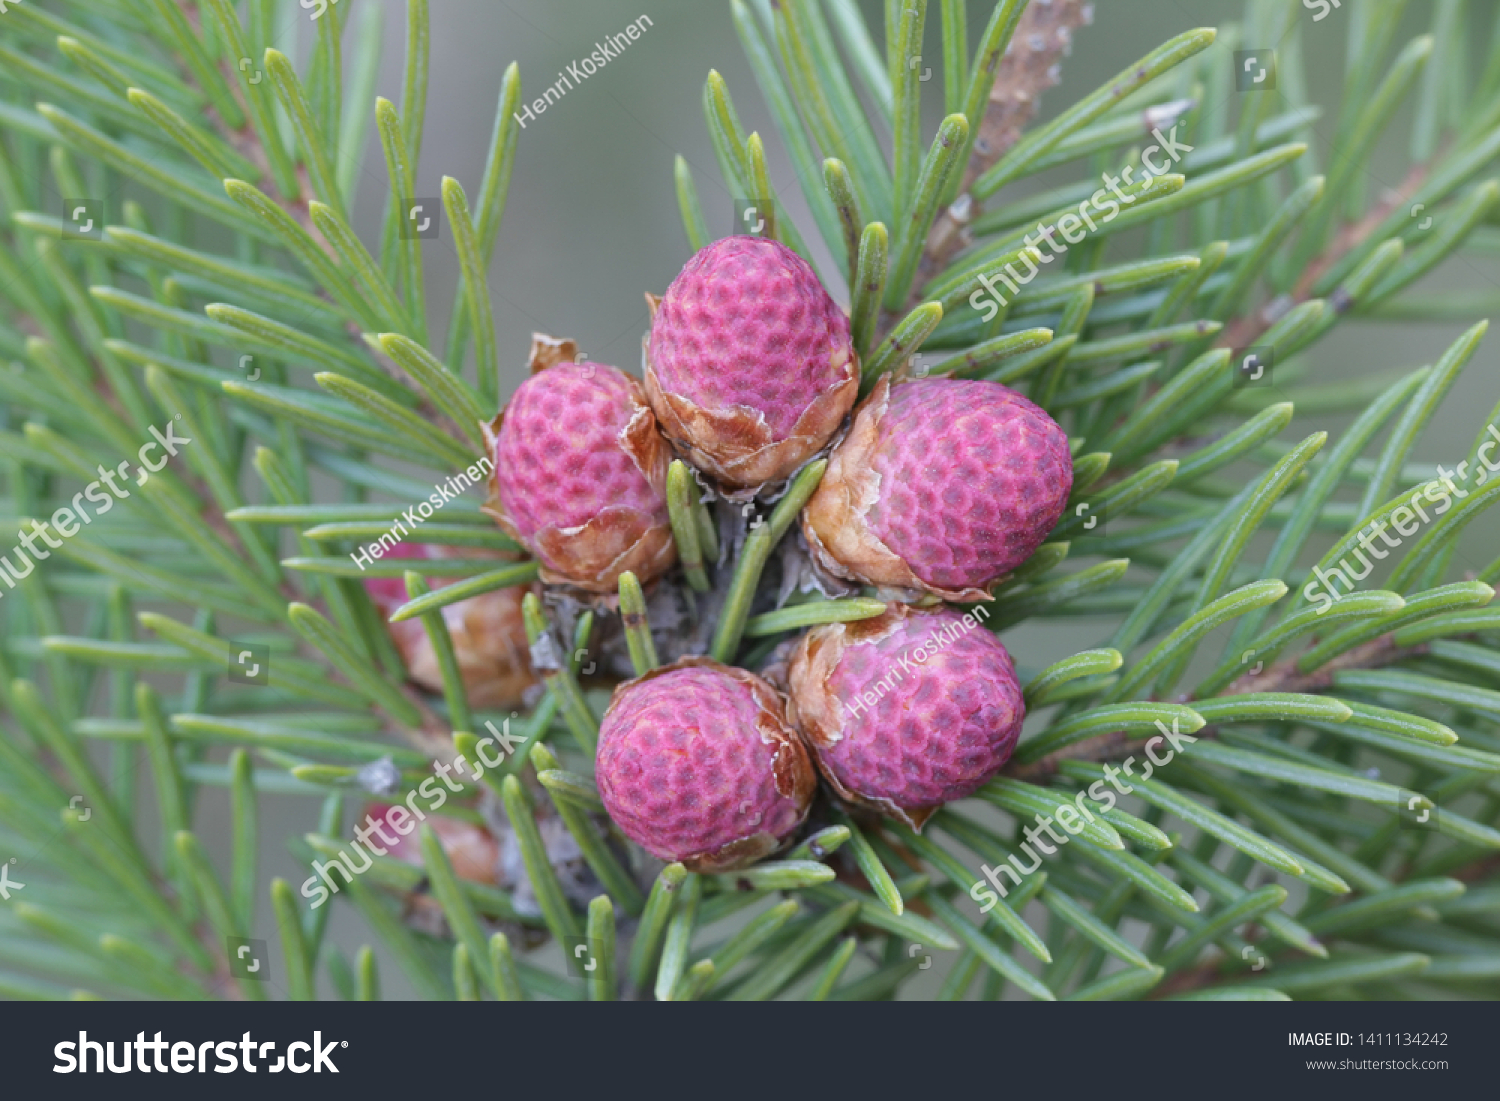 Fresh cones of Picea abies, the Norway spruce or European spruce #1411134242